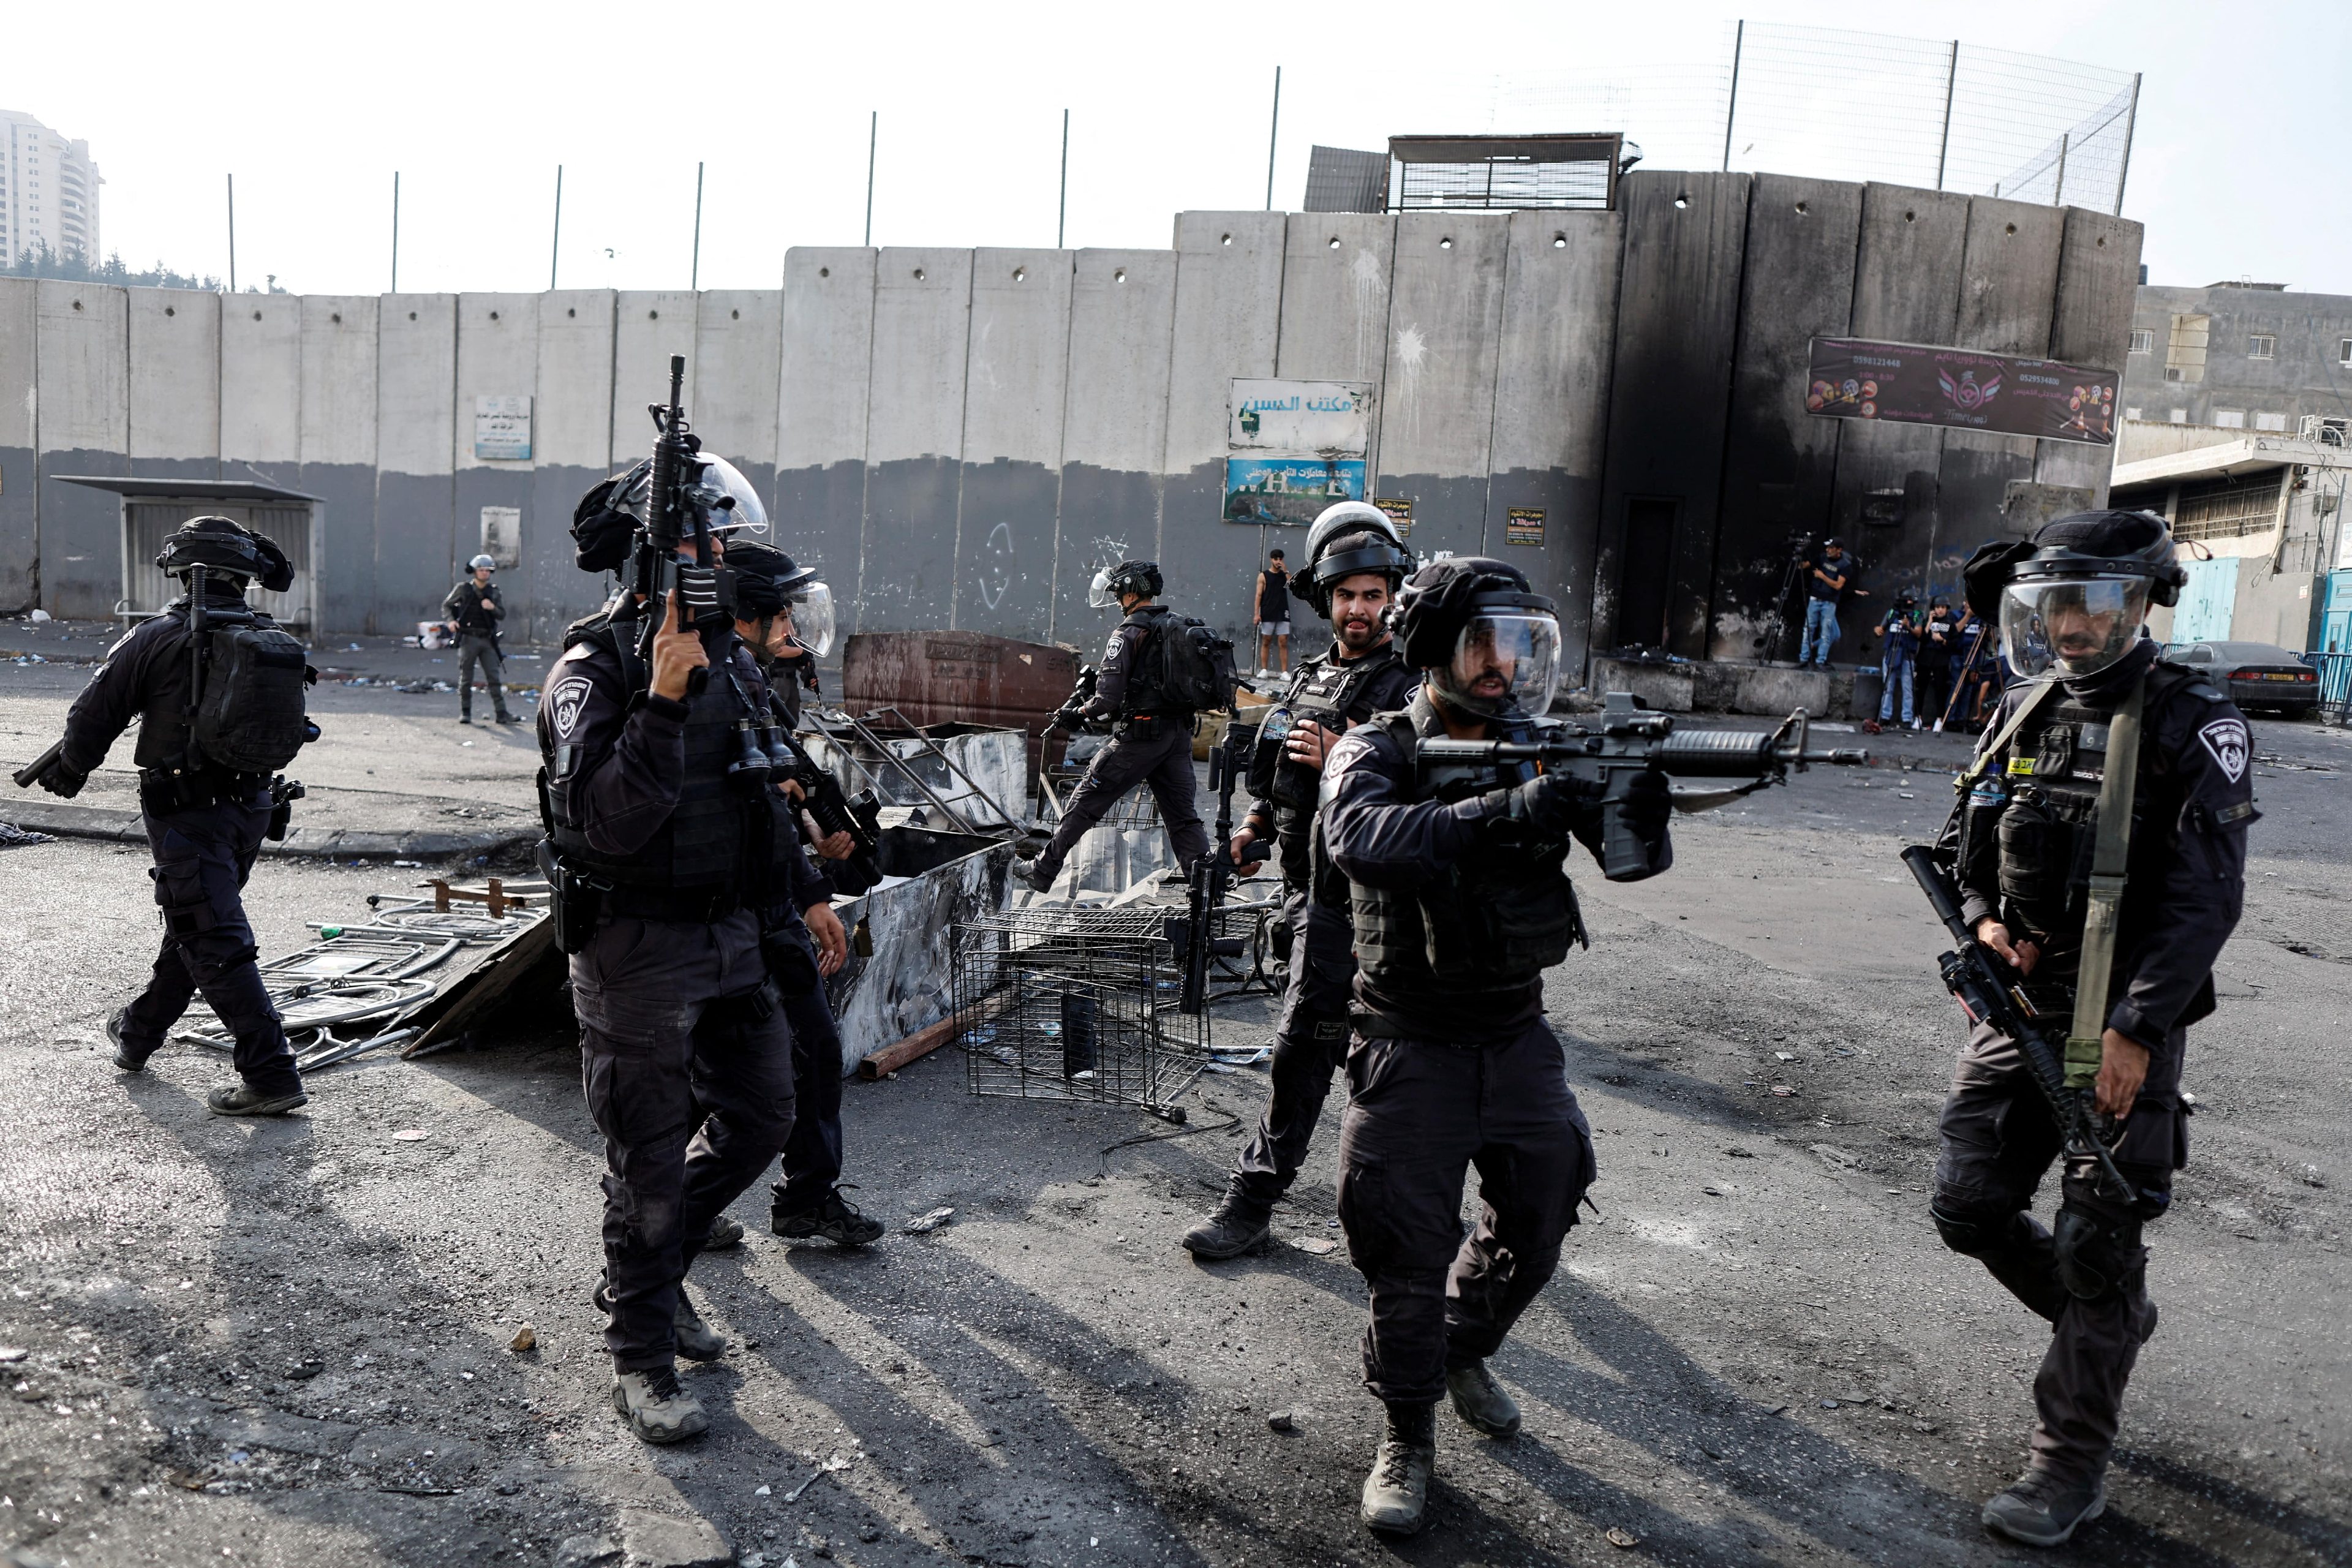 Israeli officers wield their weapons at Palestinians in the Shuafat refugee camp in East Jerusalem 12 October 2022 (Reuters)